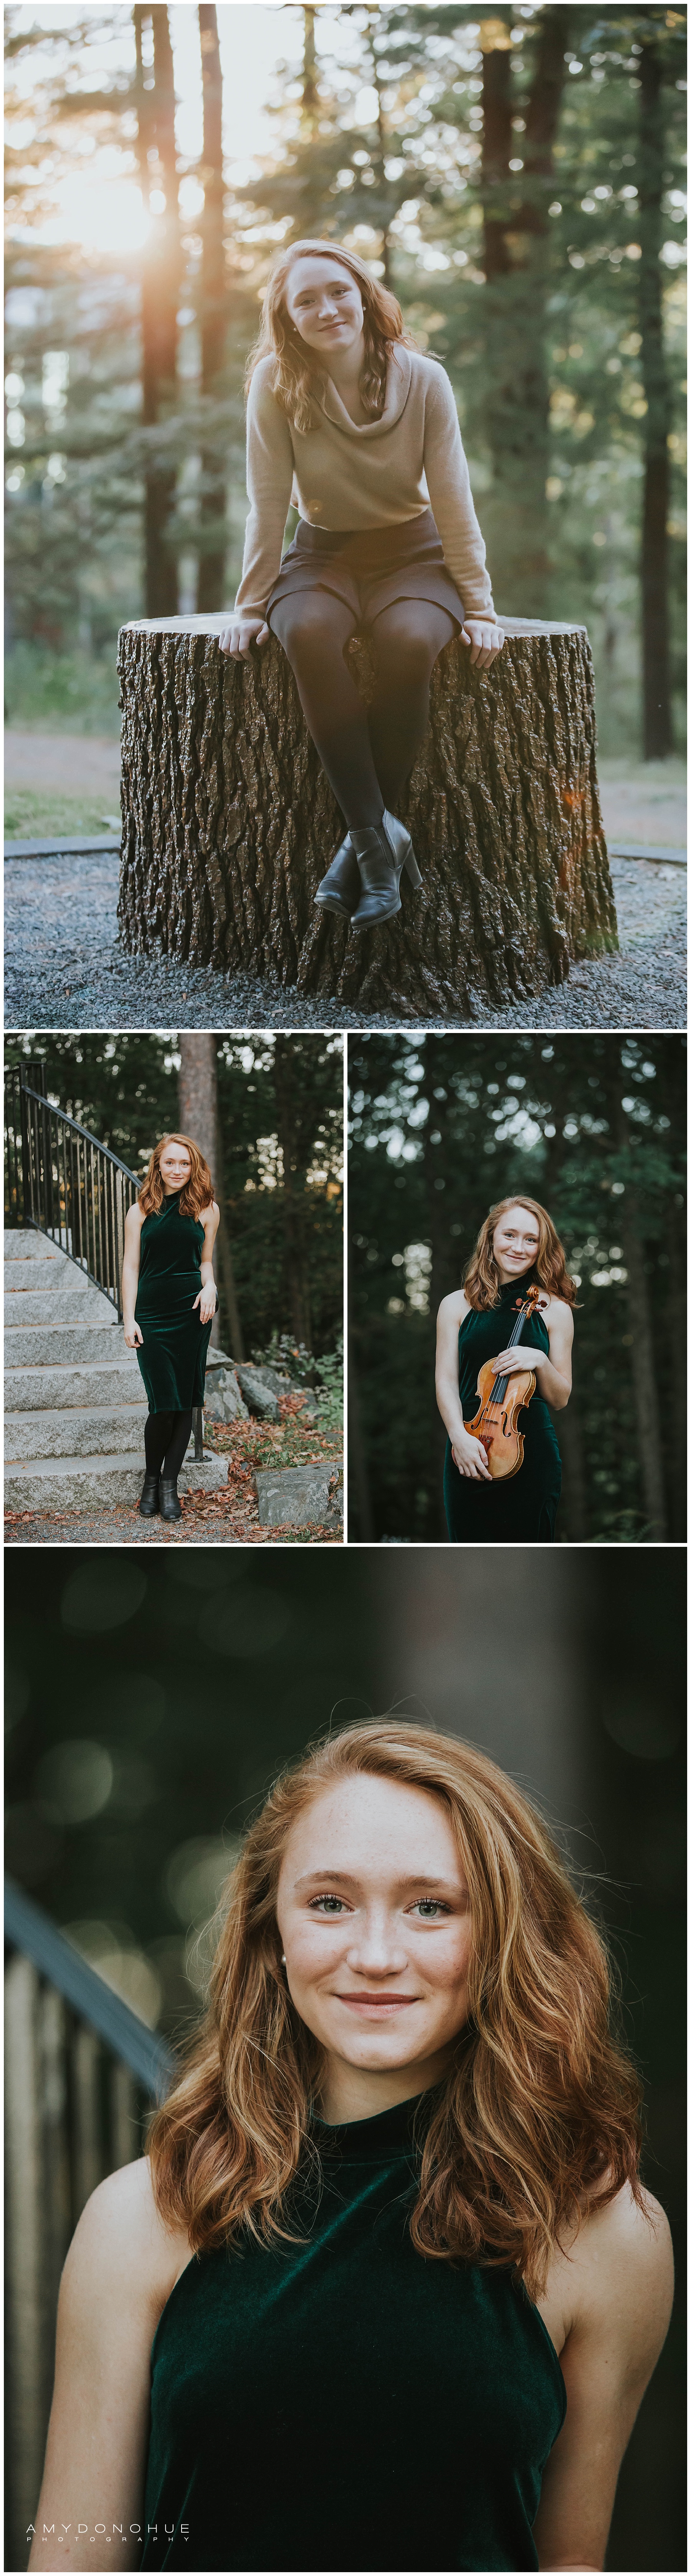 High School Senior Session © Amy Donohue Photography